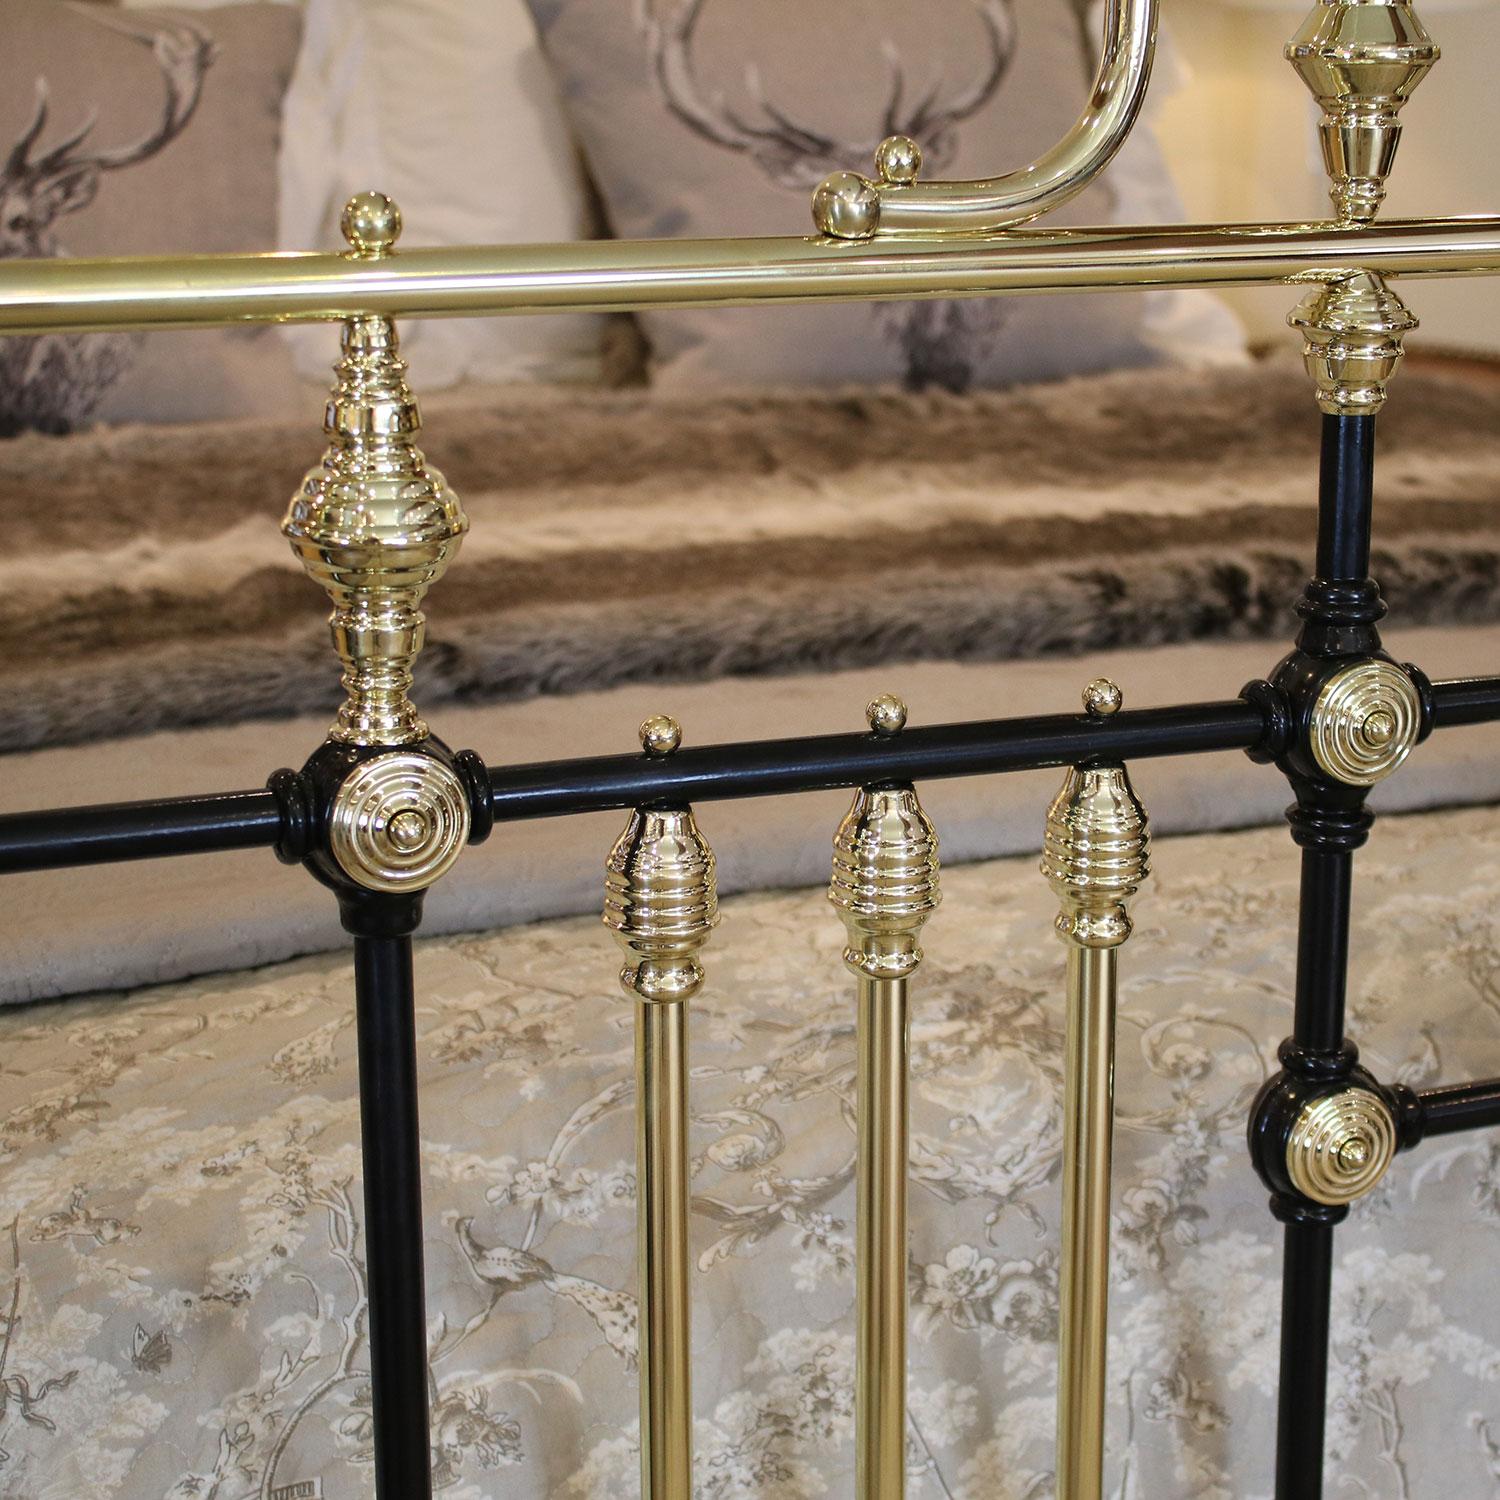 Cast Decorative Brass and Iron Bed MK151